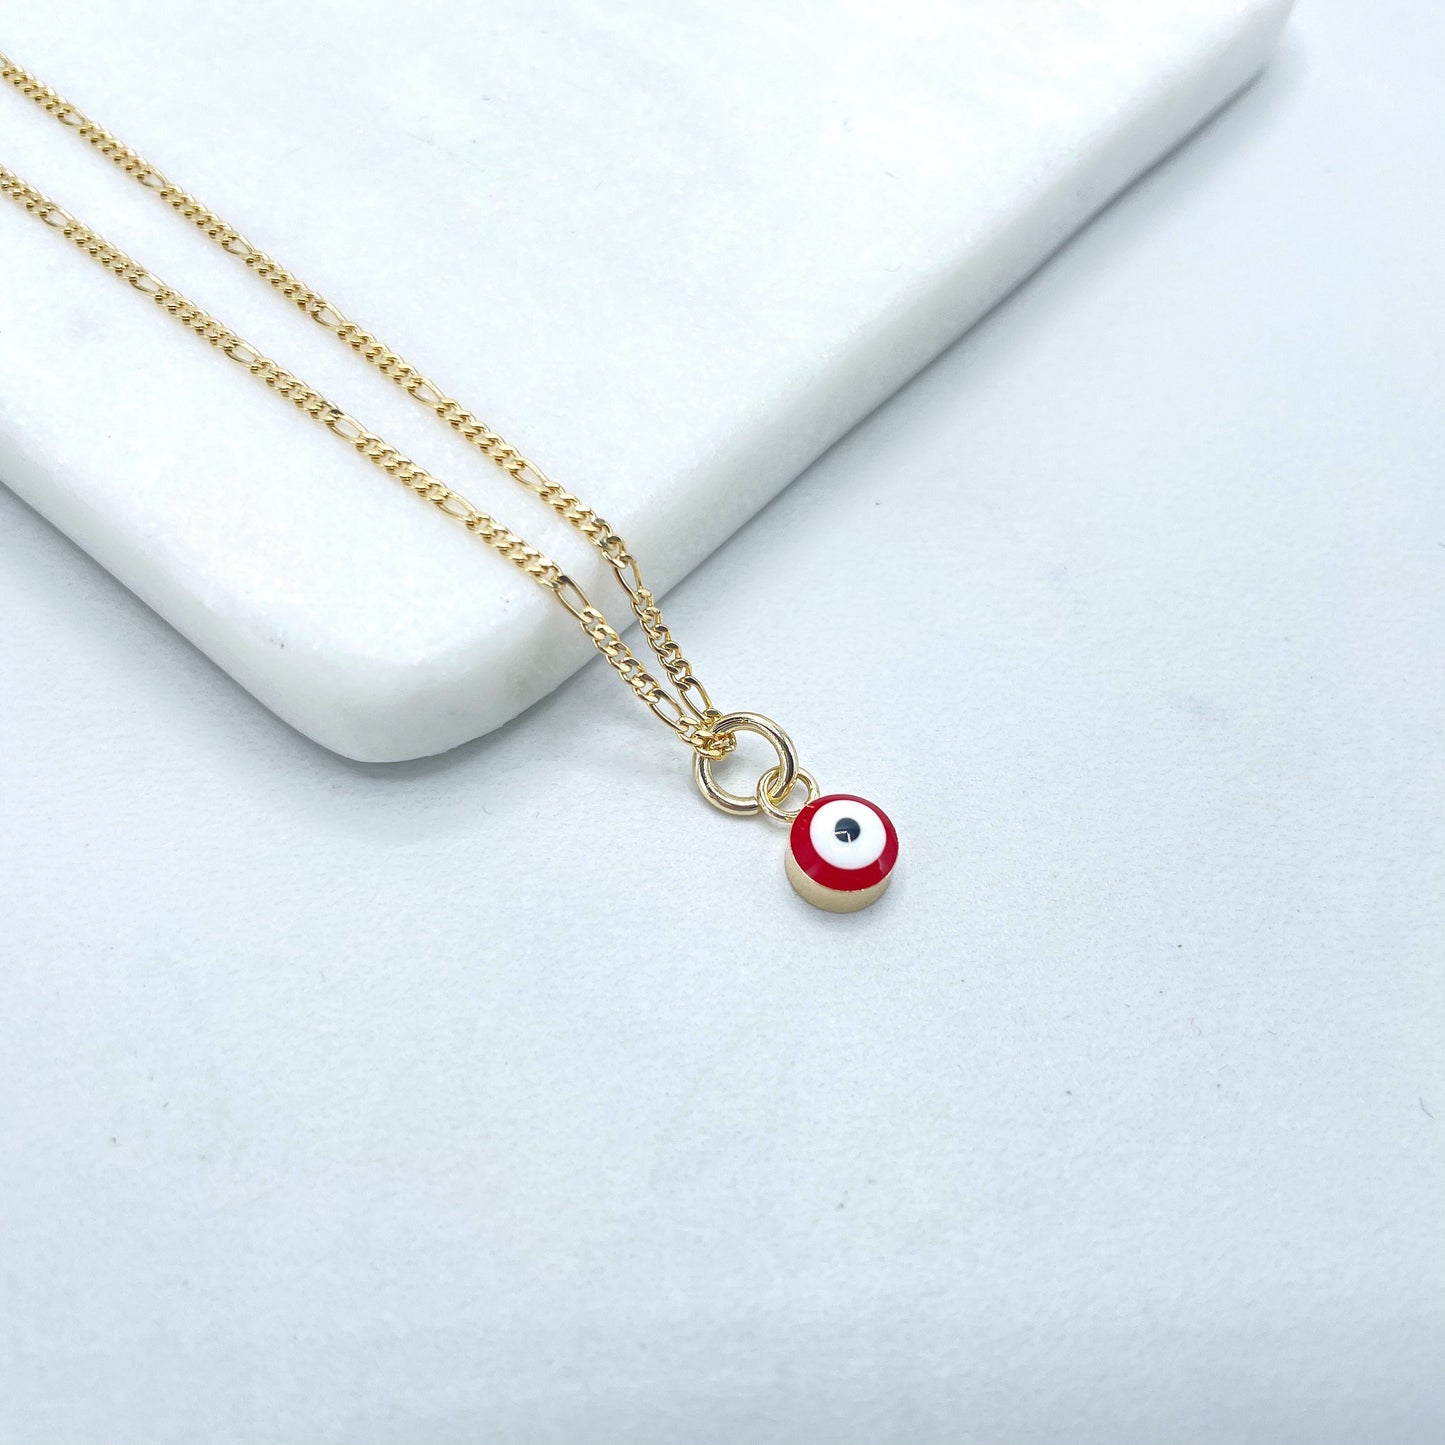 18k Gold Filled 1mm Figaro Link Dainty Chain, Red Greek Evil Eyes Earrings or Charm, Small or Medium Size, Wholesale Jewelry Making Supplies